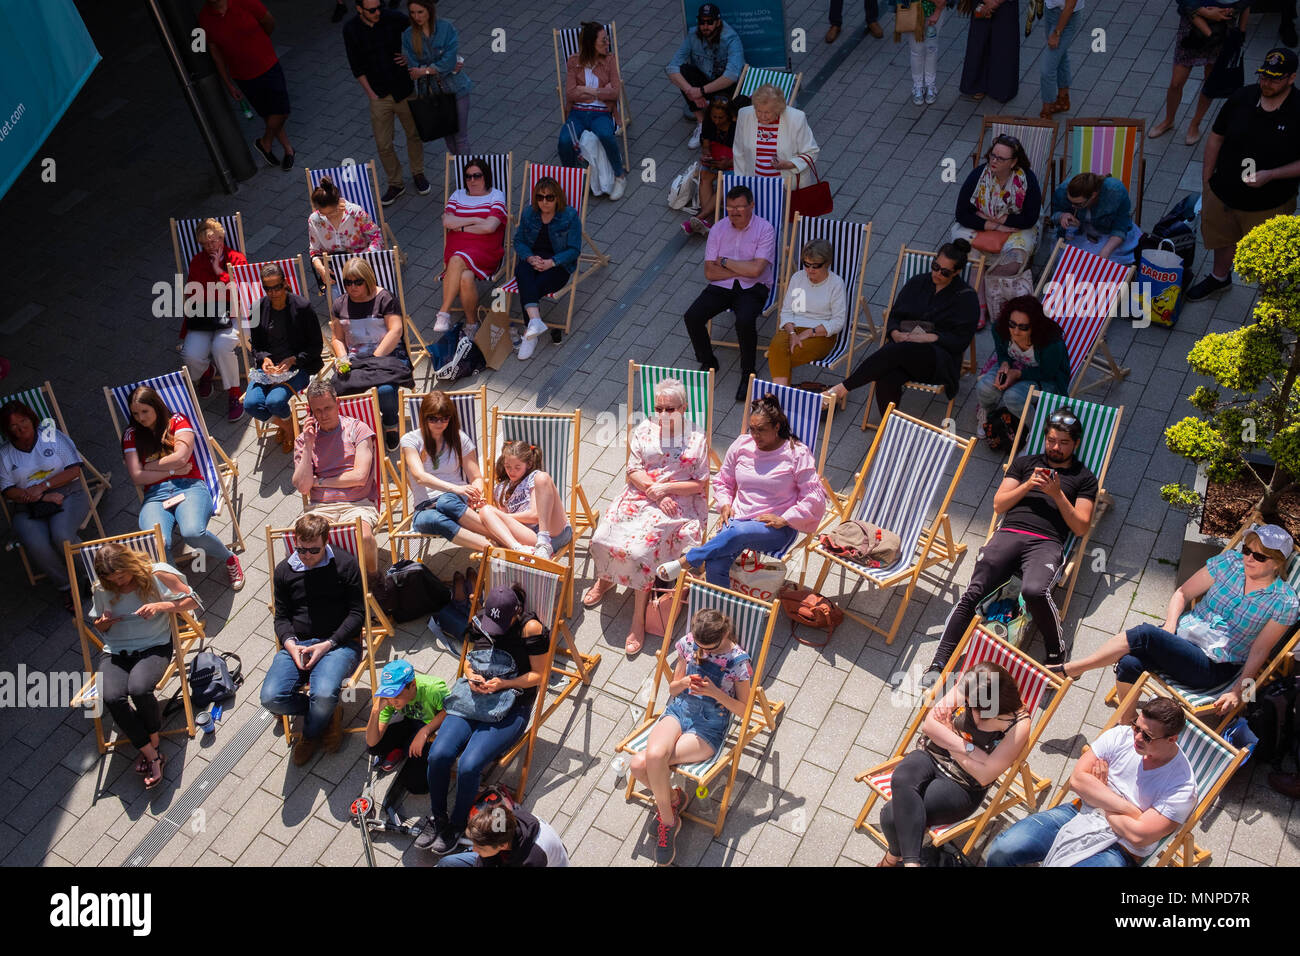 London, England, 19th May 2018.  A crowd is seated on deckchairs watching the Royal Wedding on a big screen at the LDO in Wembley Park © Tim Ring/Alamy Live News Stock Photo